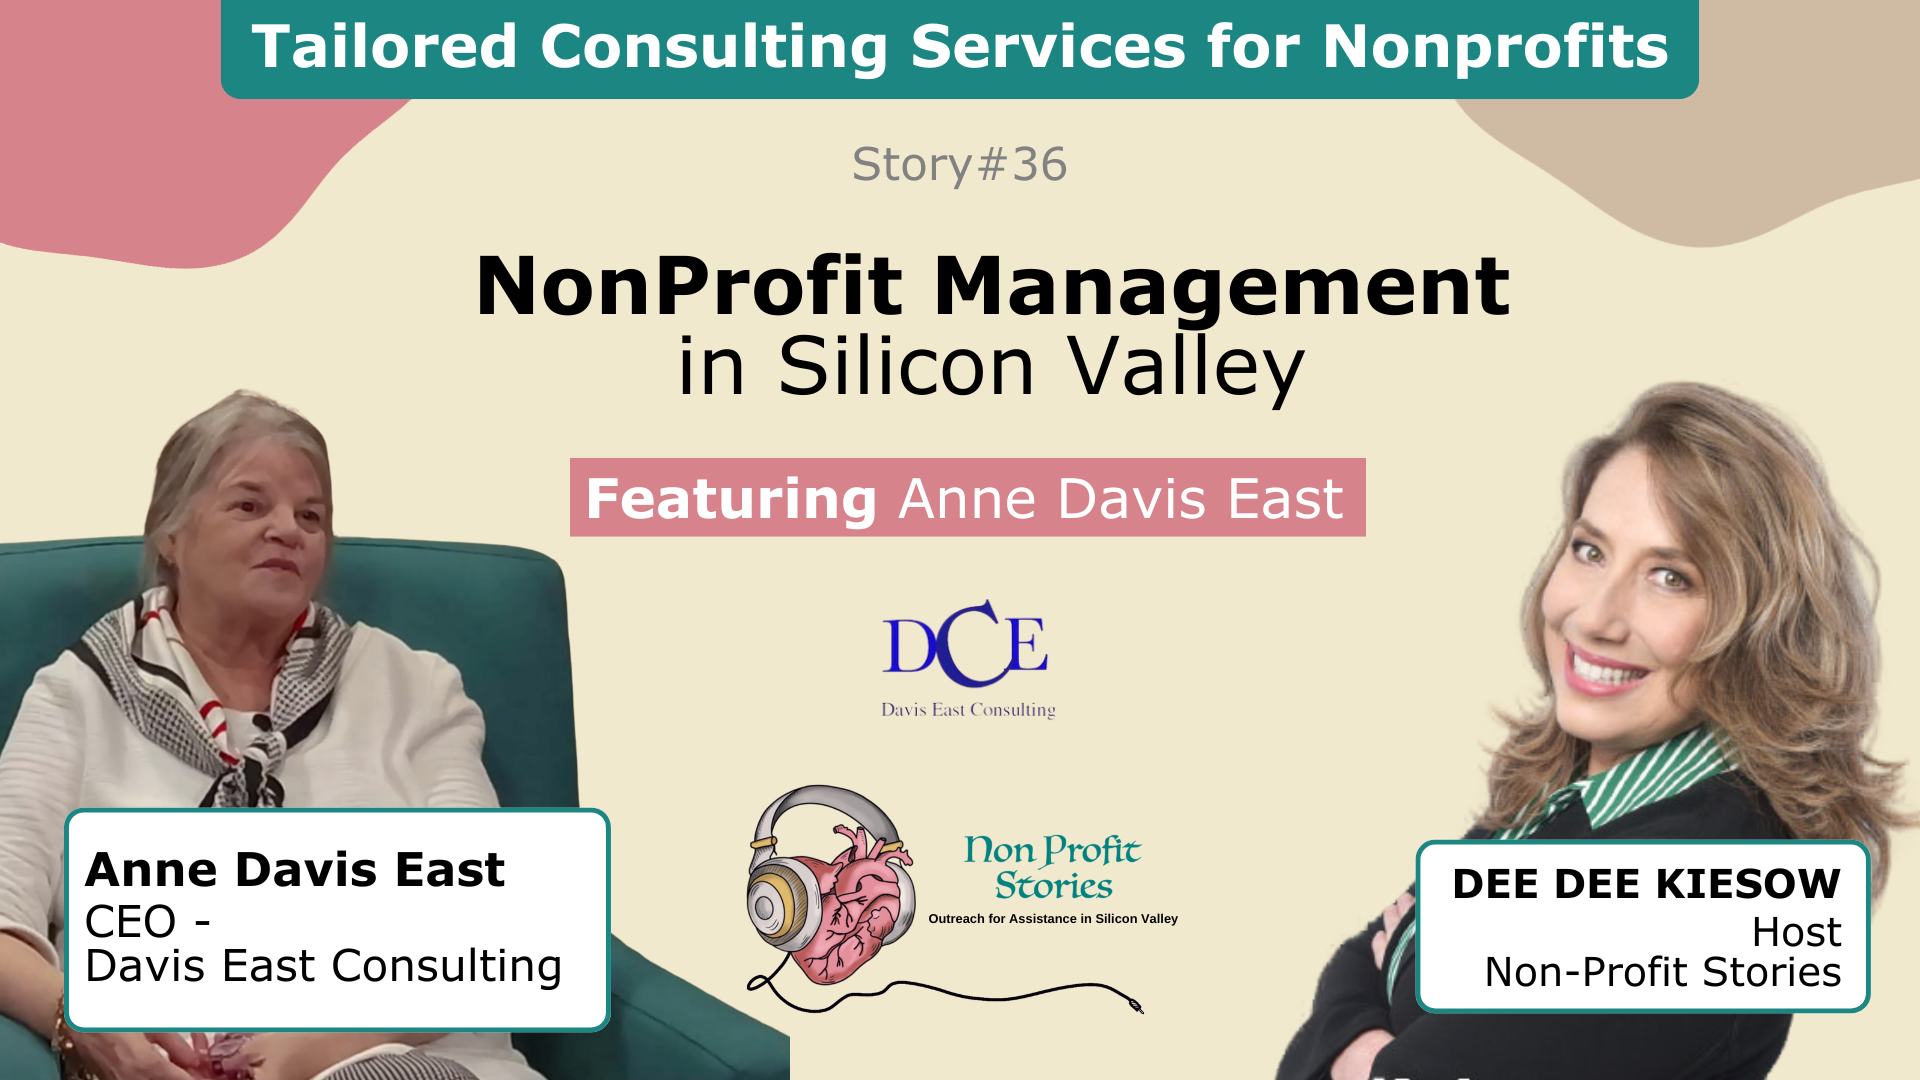 Nonprofit Management: Tailored Consulting Services for Nonprofits in Silicon Valley